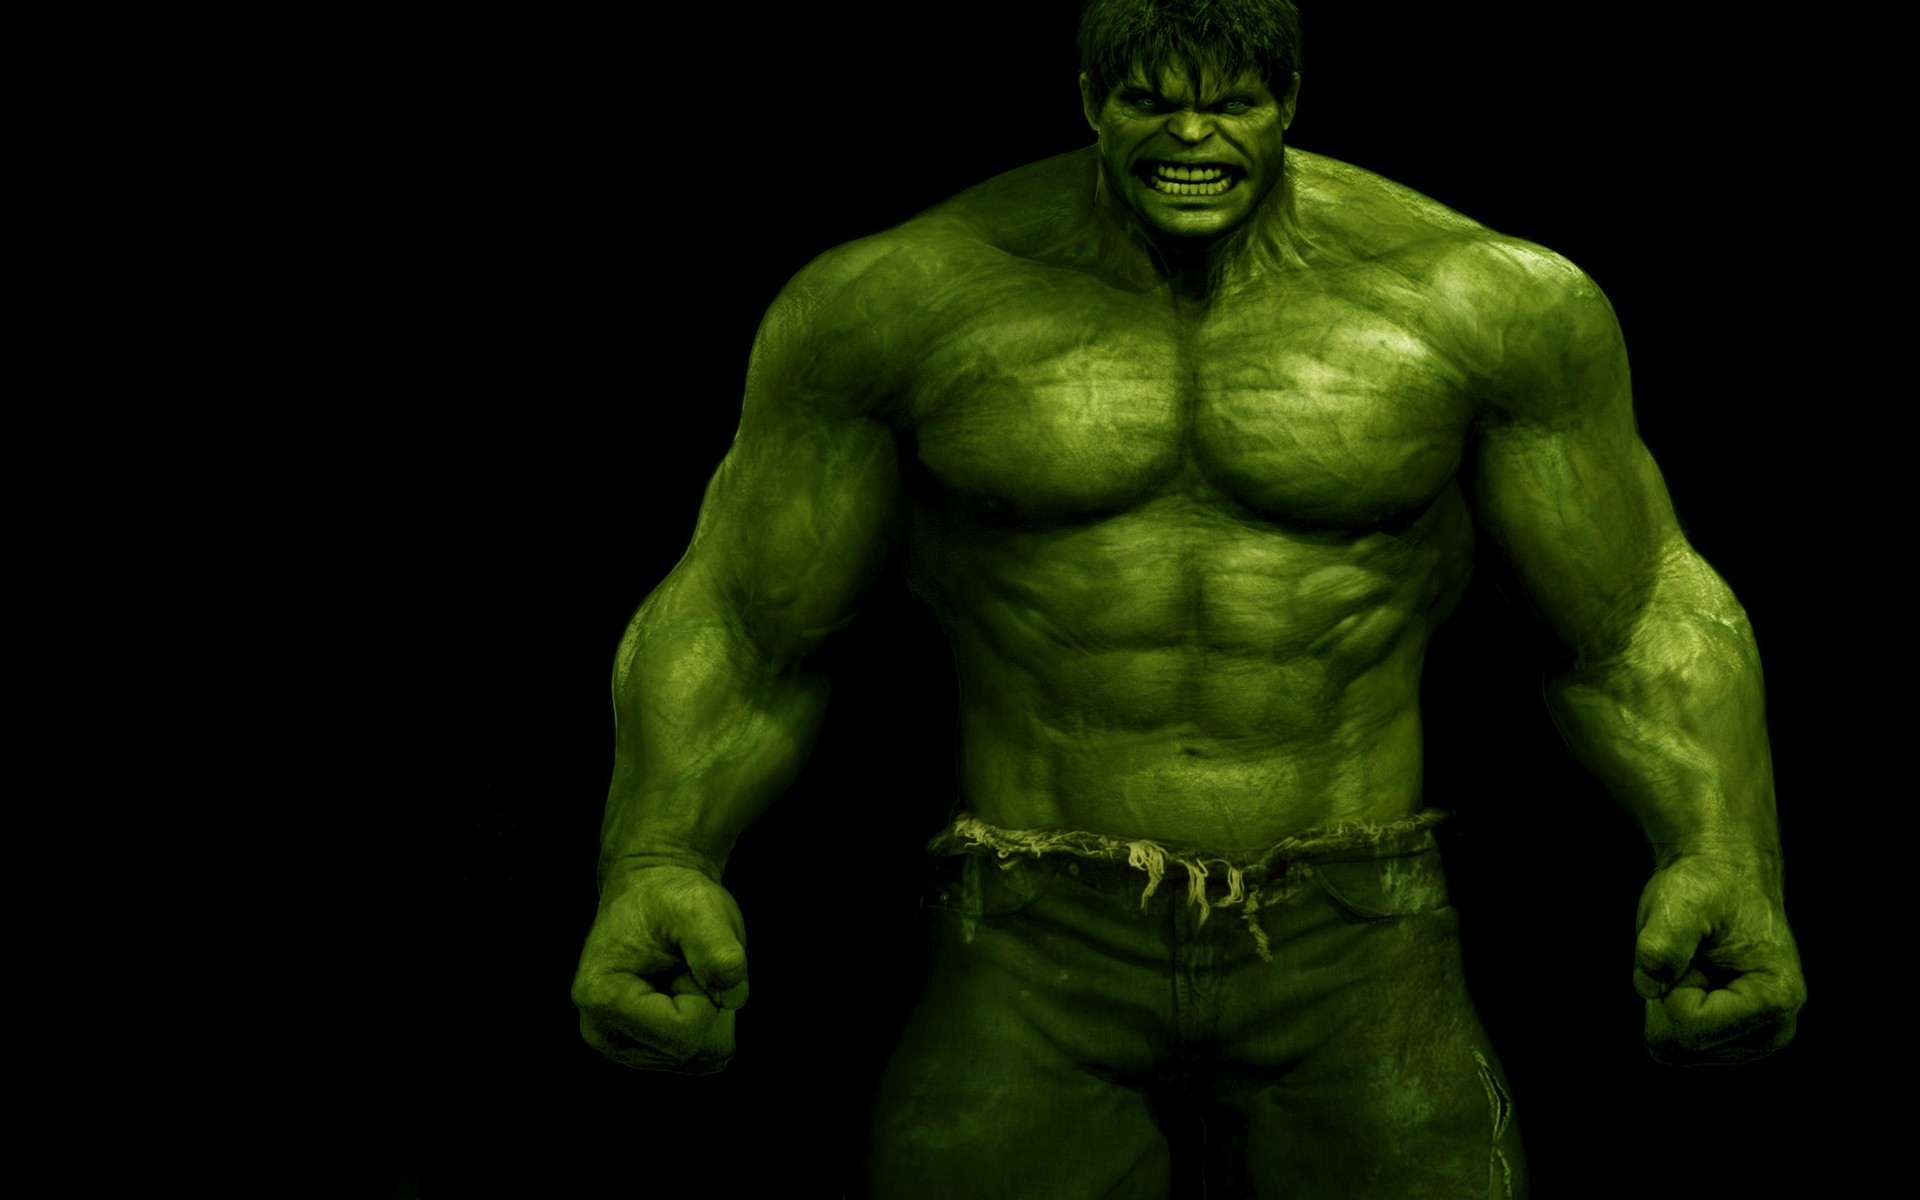 Little Known Facts About The Hulk